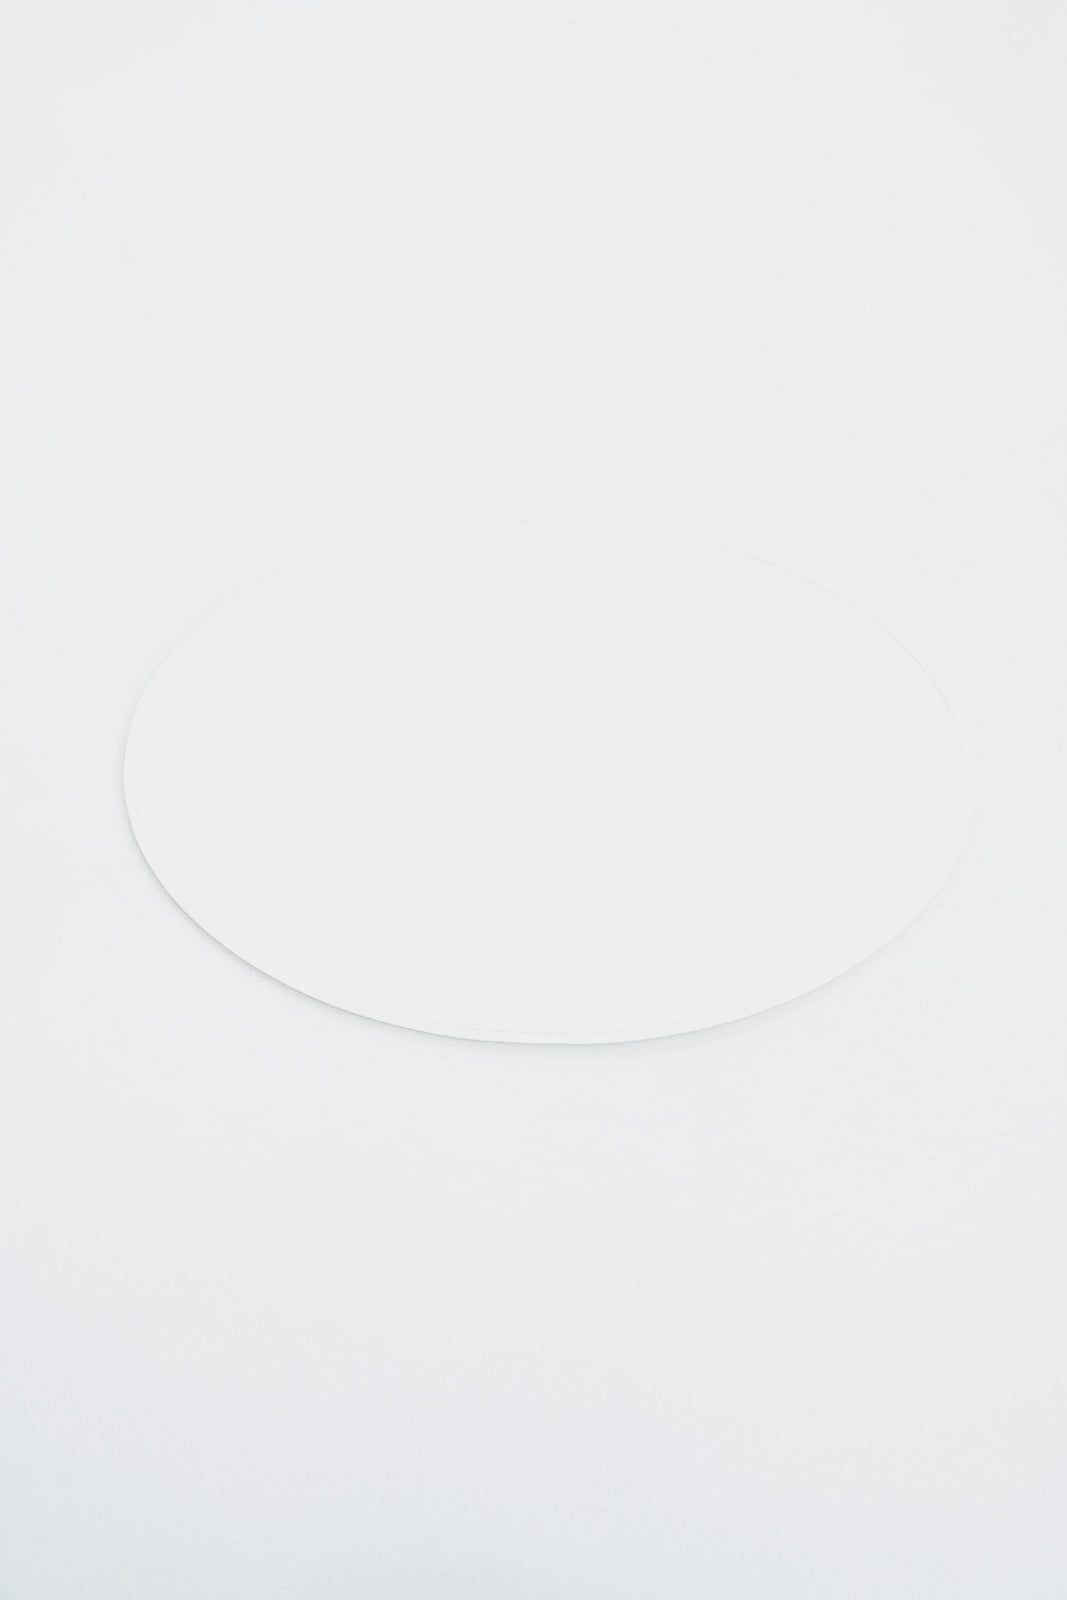 Oval Cuoio Set of 4 Placemats